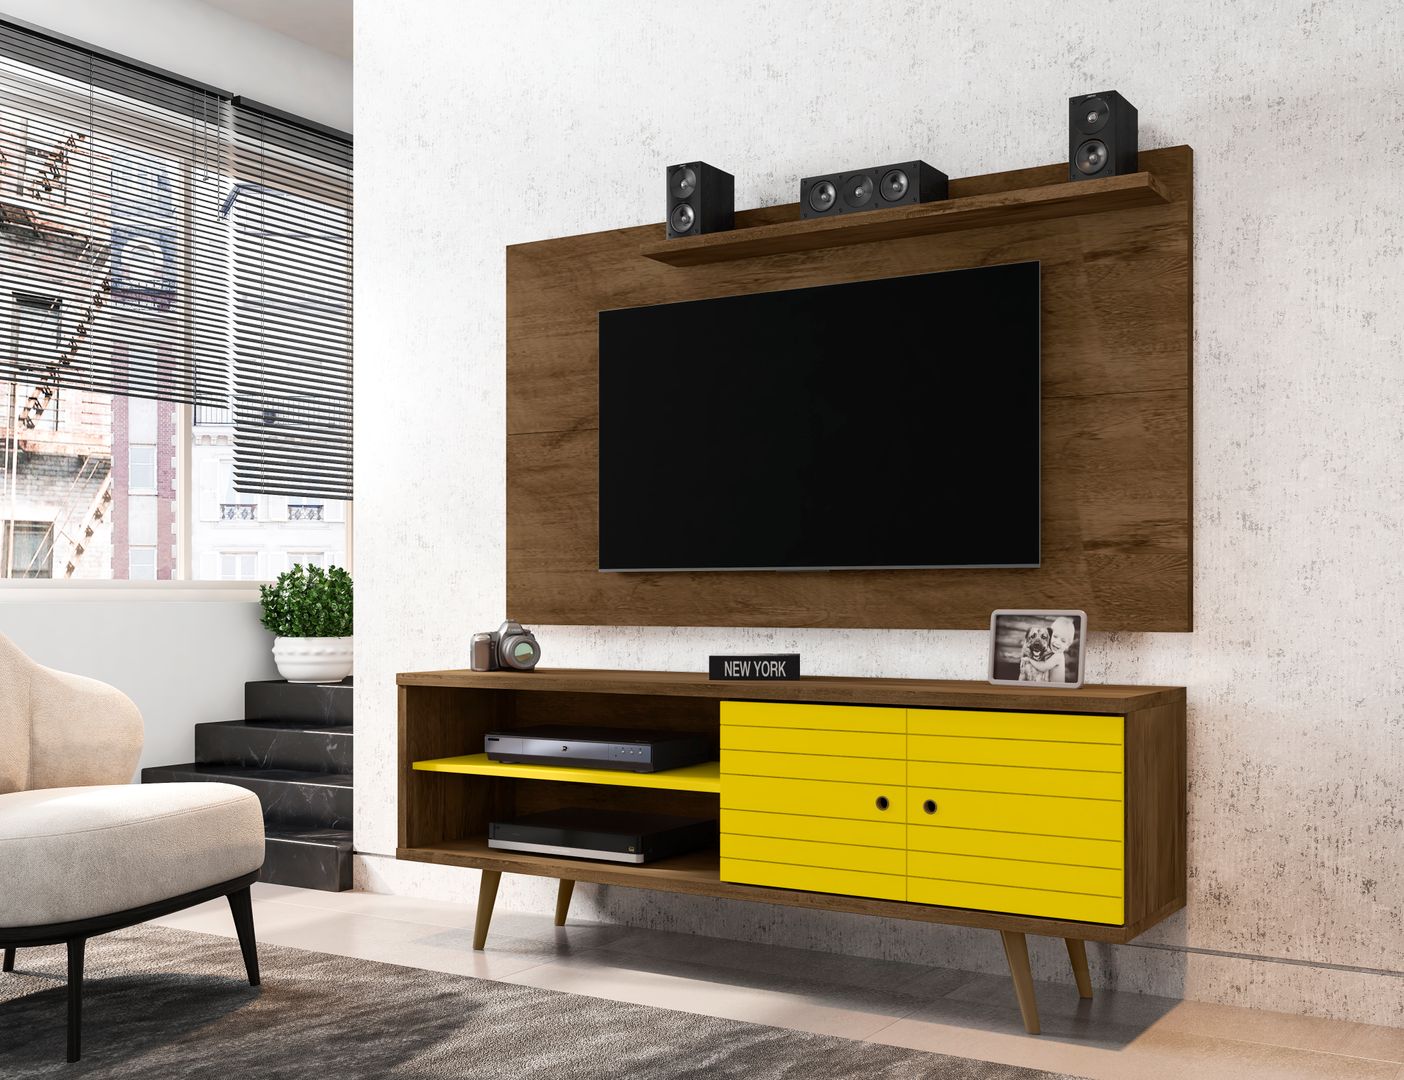 Manhattan Comfort Liberty 62.99 Mid-Century Modern TV Stand and Panel with Solid Wood Legs in Rustic Brown and Yellow